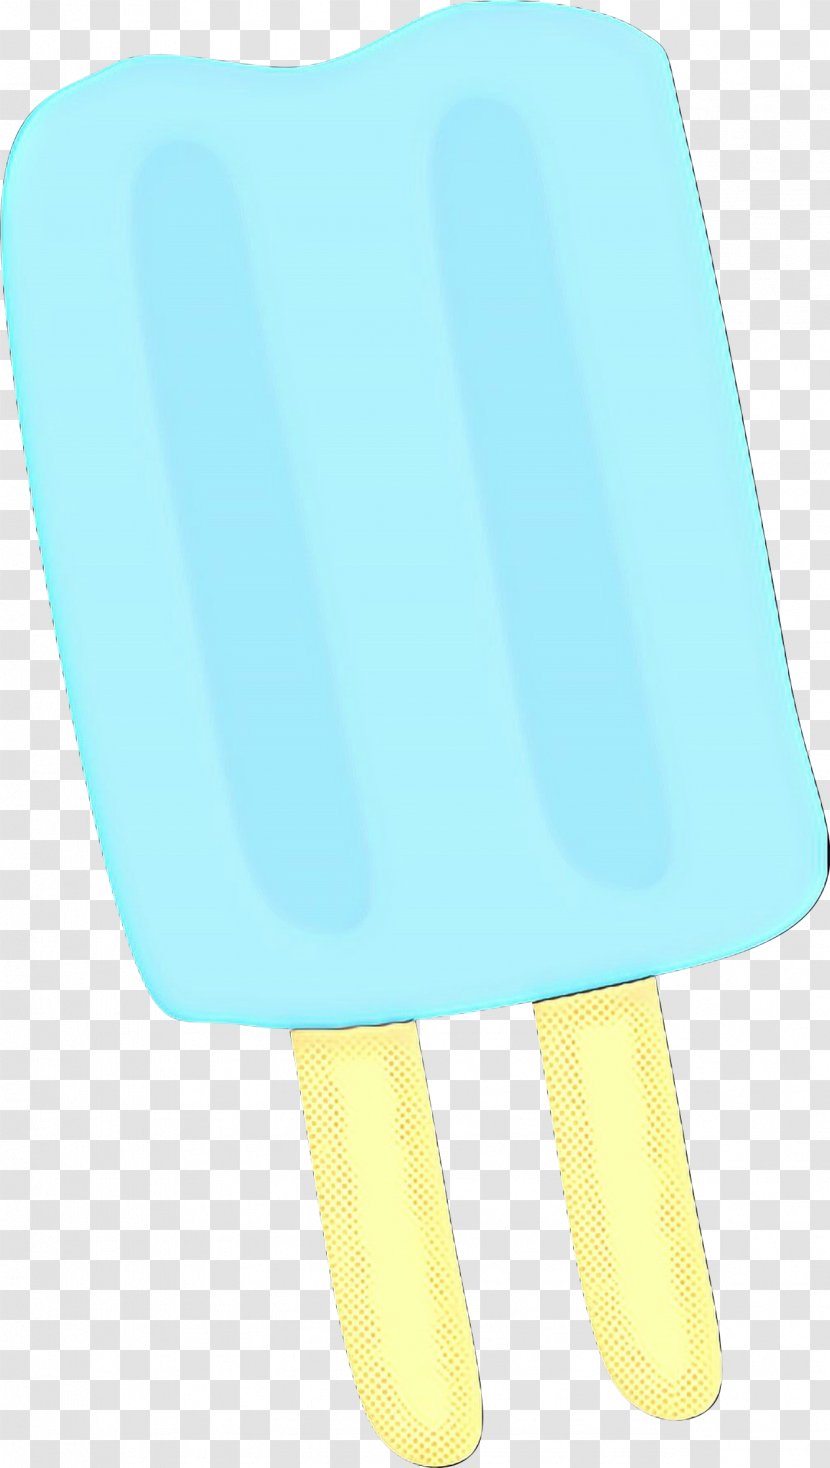 Ice Cream Background - Rectangle - Dessert Turquoise Transparent PNG